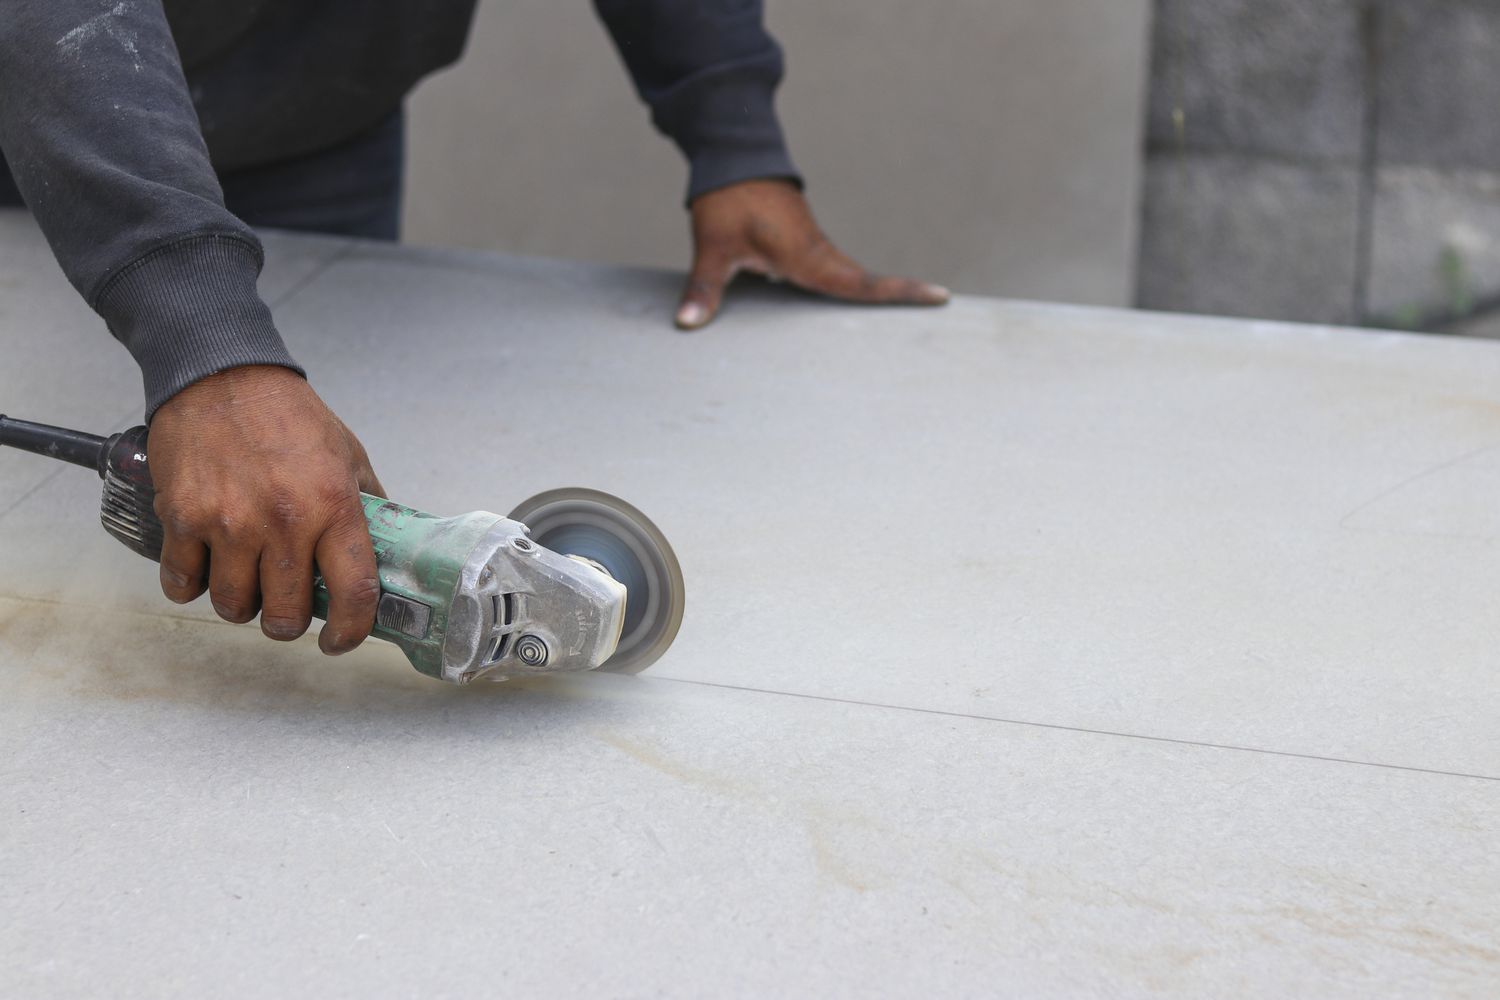 Cutting Cement Backer Board With a Grinder